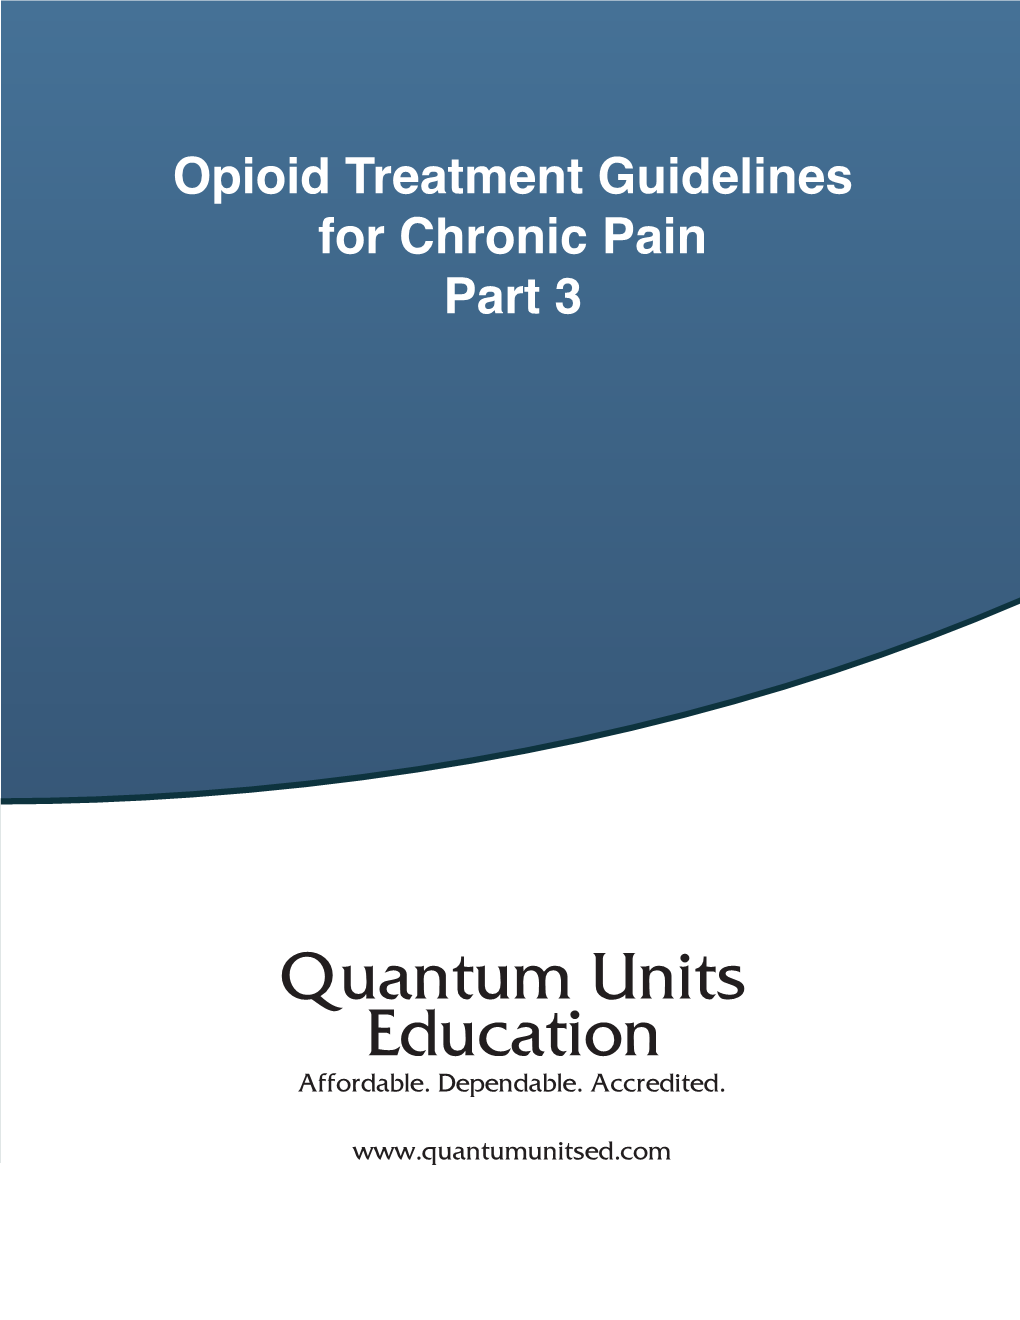 Opioid Treatment Guidelines for Chronic Pain Part 3 ������ �������� �������� ��������� ��� ����Id ������� ��� ������� ��